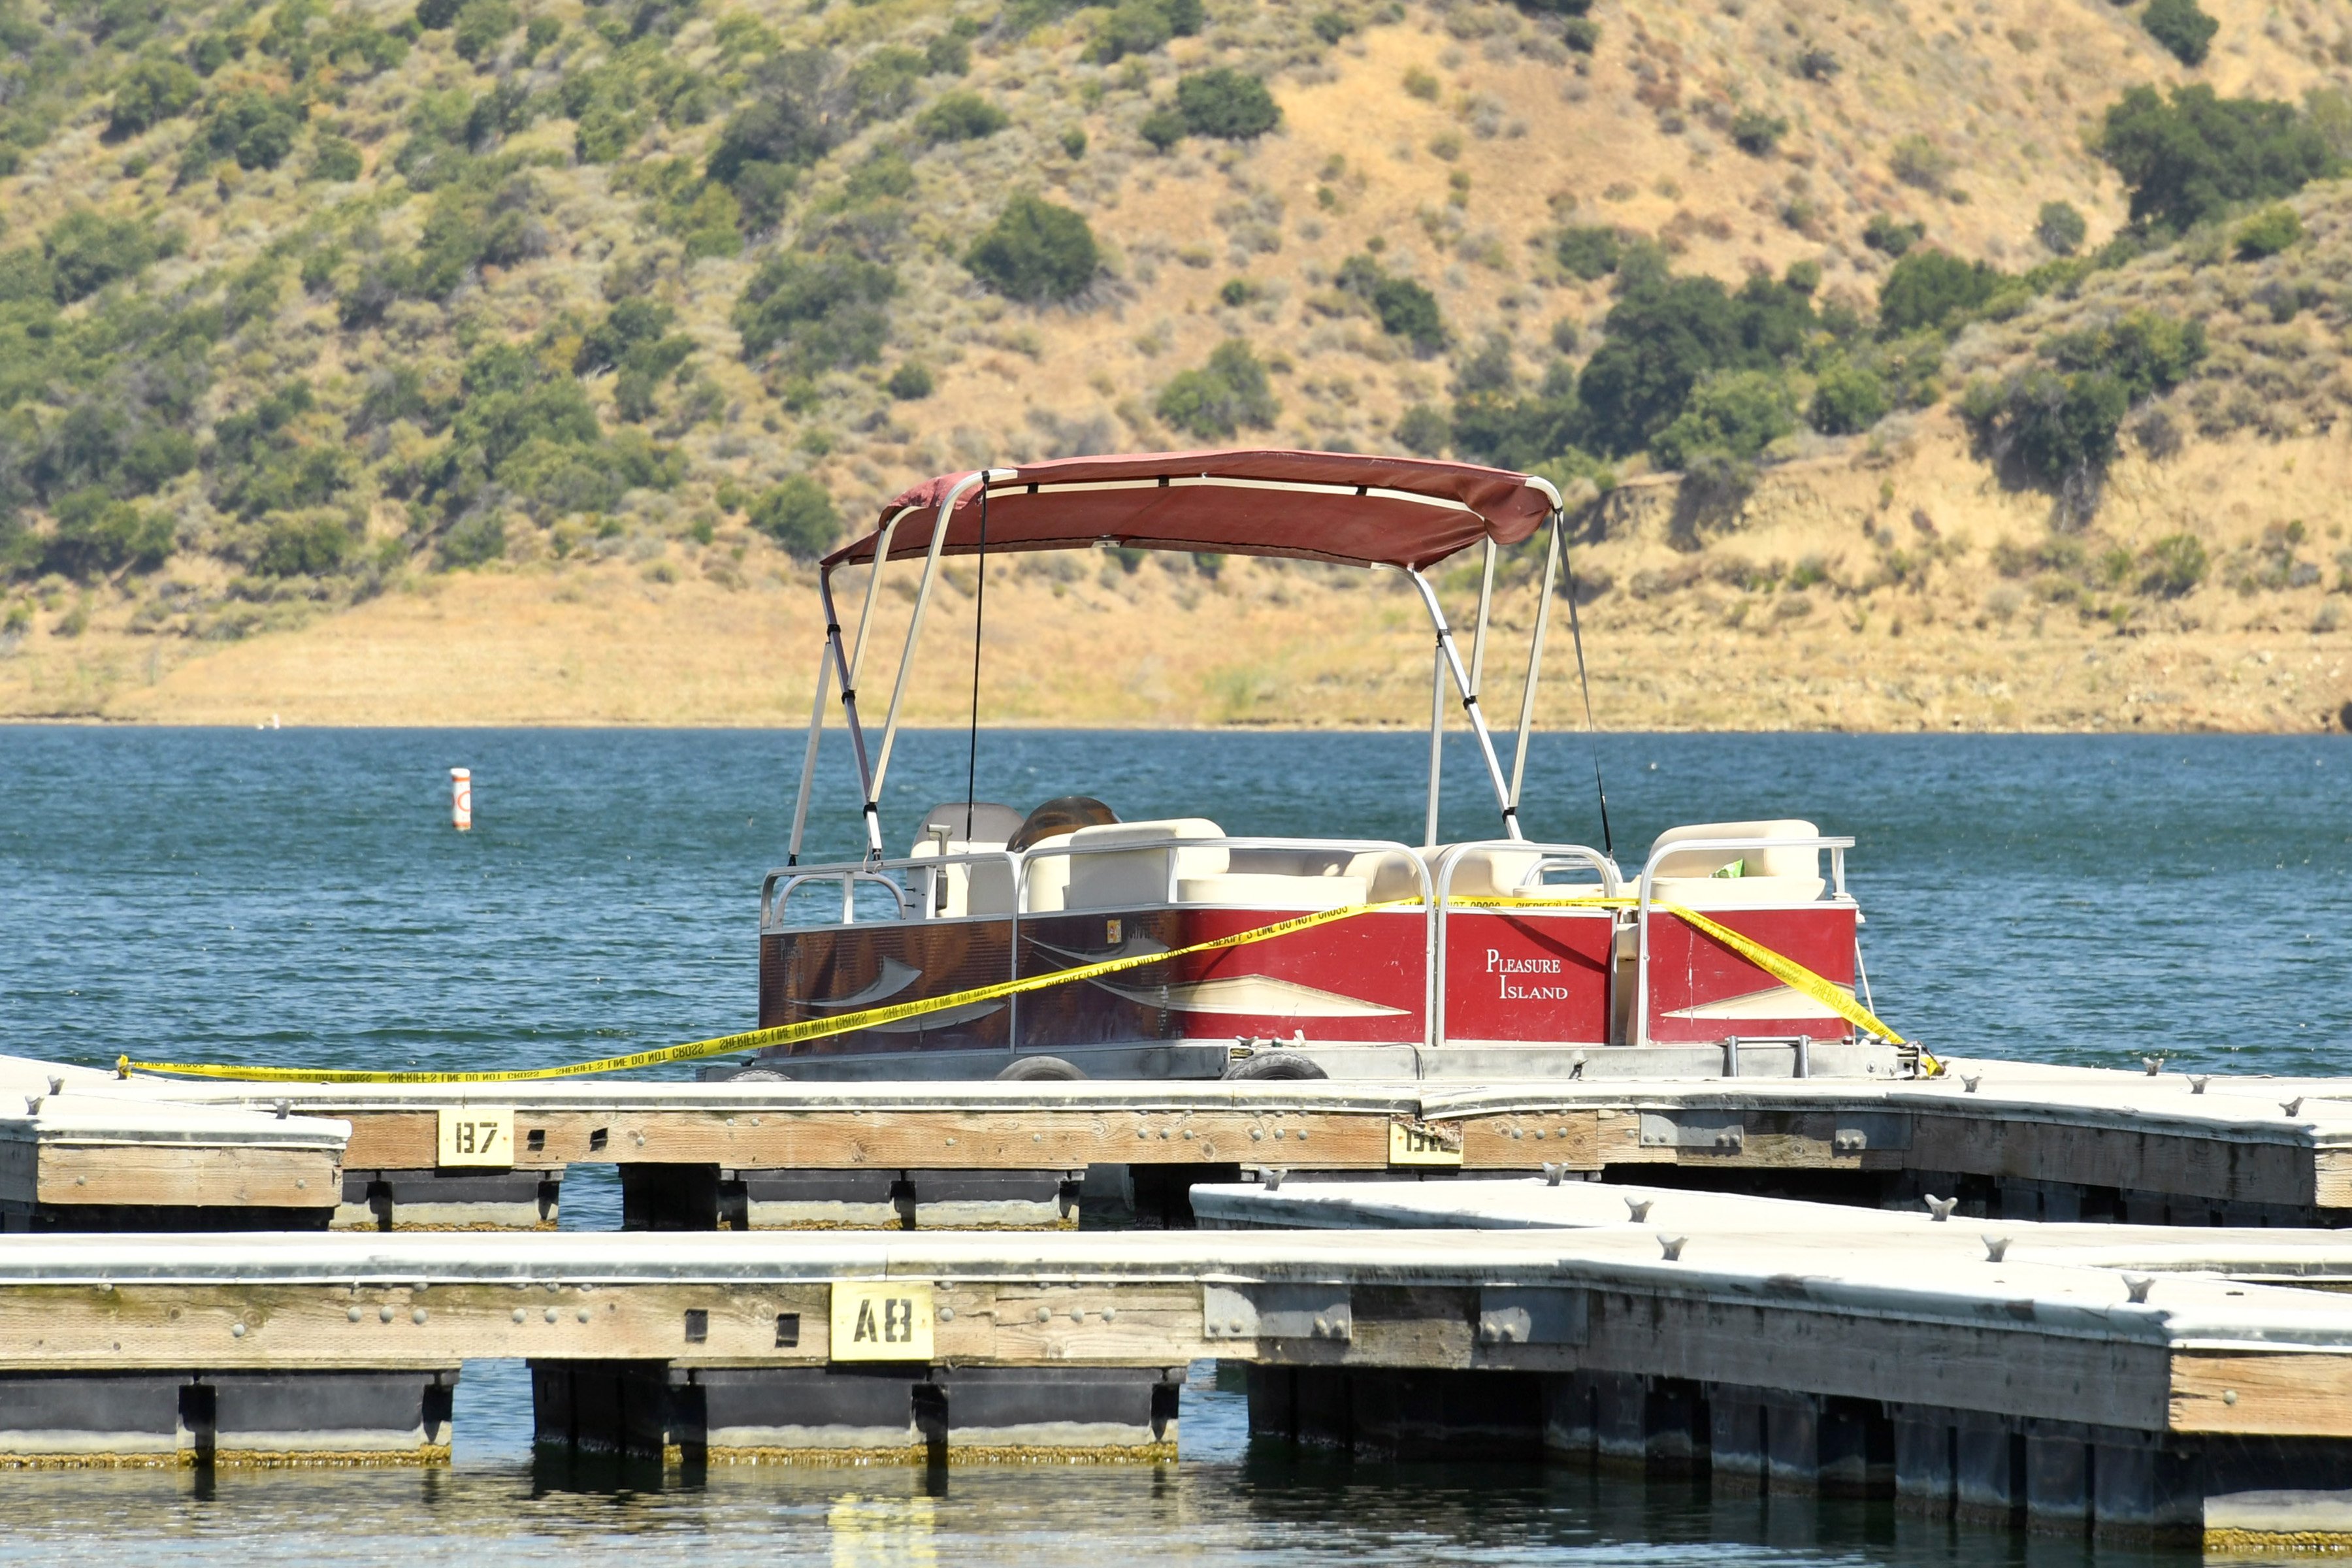 A boat is docked and roped off with police tape at Lake Piru, where actress Naya Rivera was reported missing Wednesday, on July 9, 2020, in Piru, California. | Source: Getty Images.